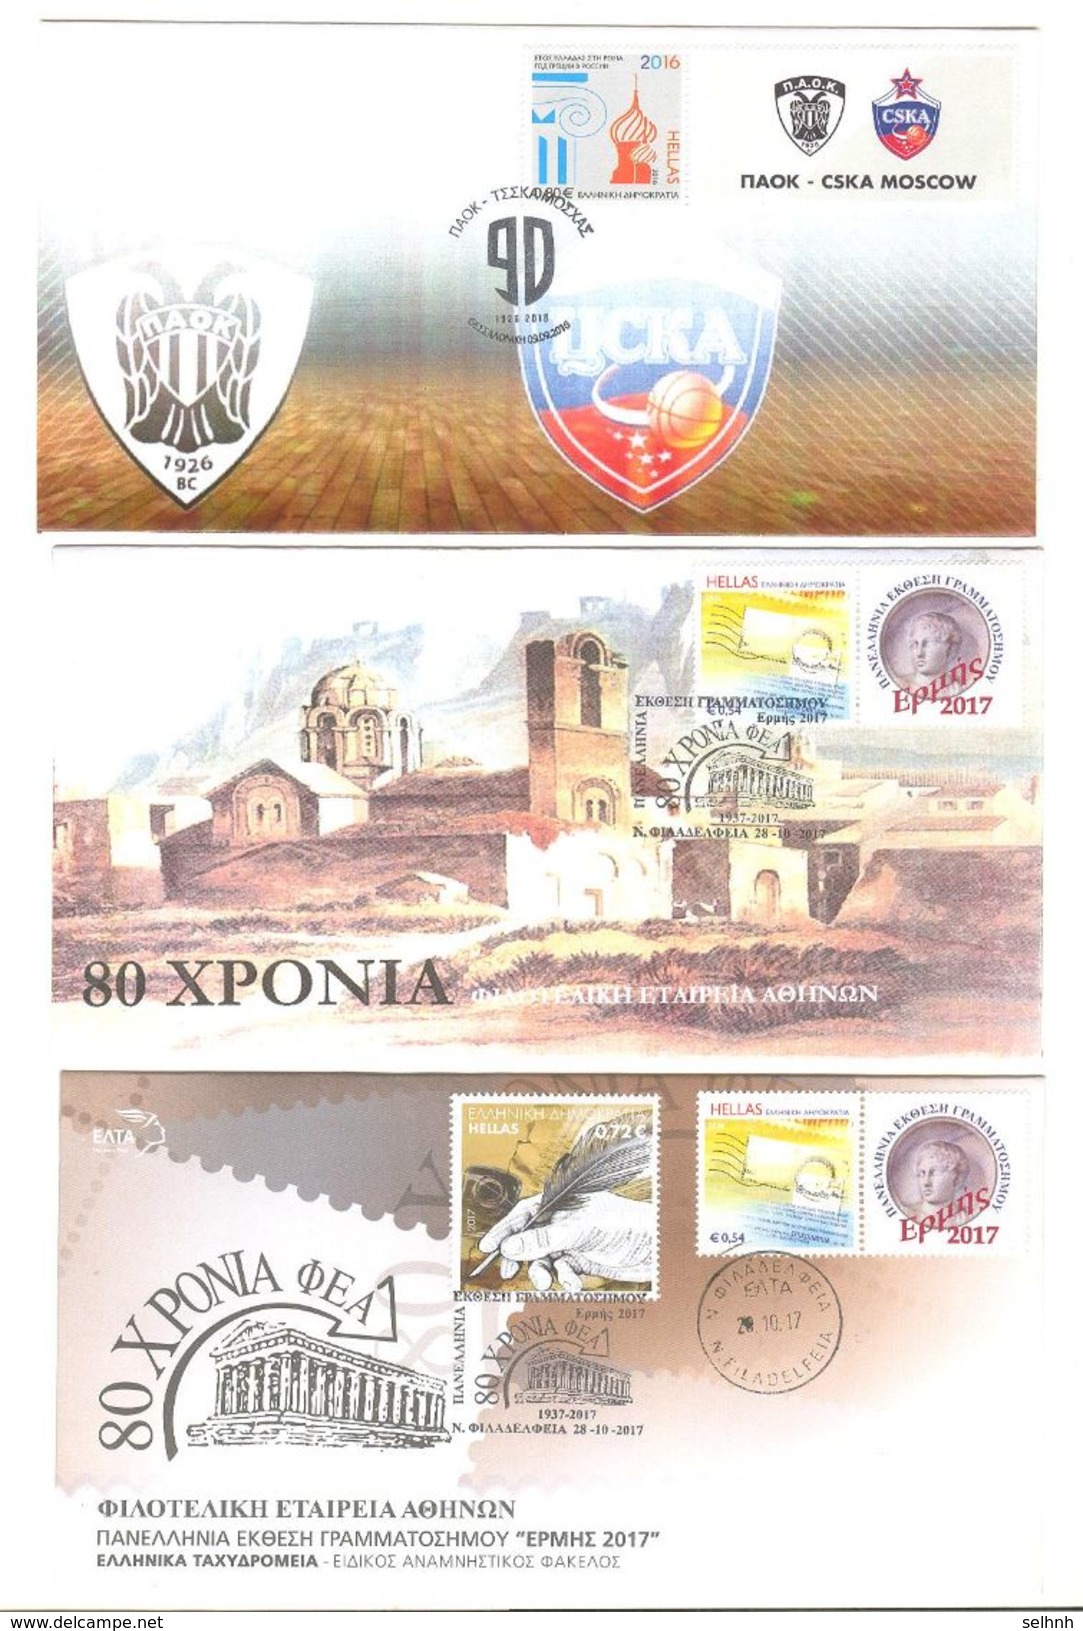 GREECE GRECE GREEK 8 COVERS WITH COMMEMORATIVE POSTMARKS AND VIGNETTES OF 2016 AND 2017 - Postal Logo & Postmarks